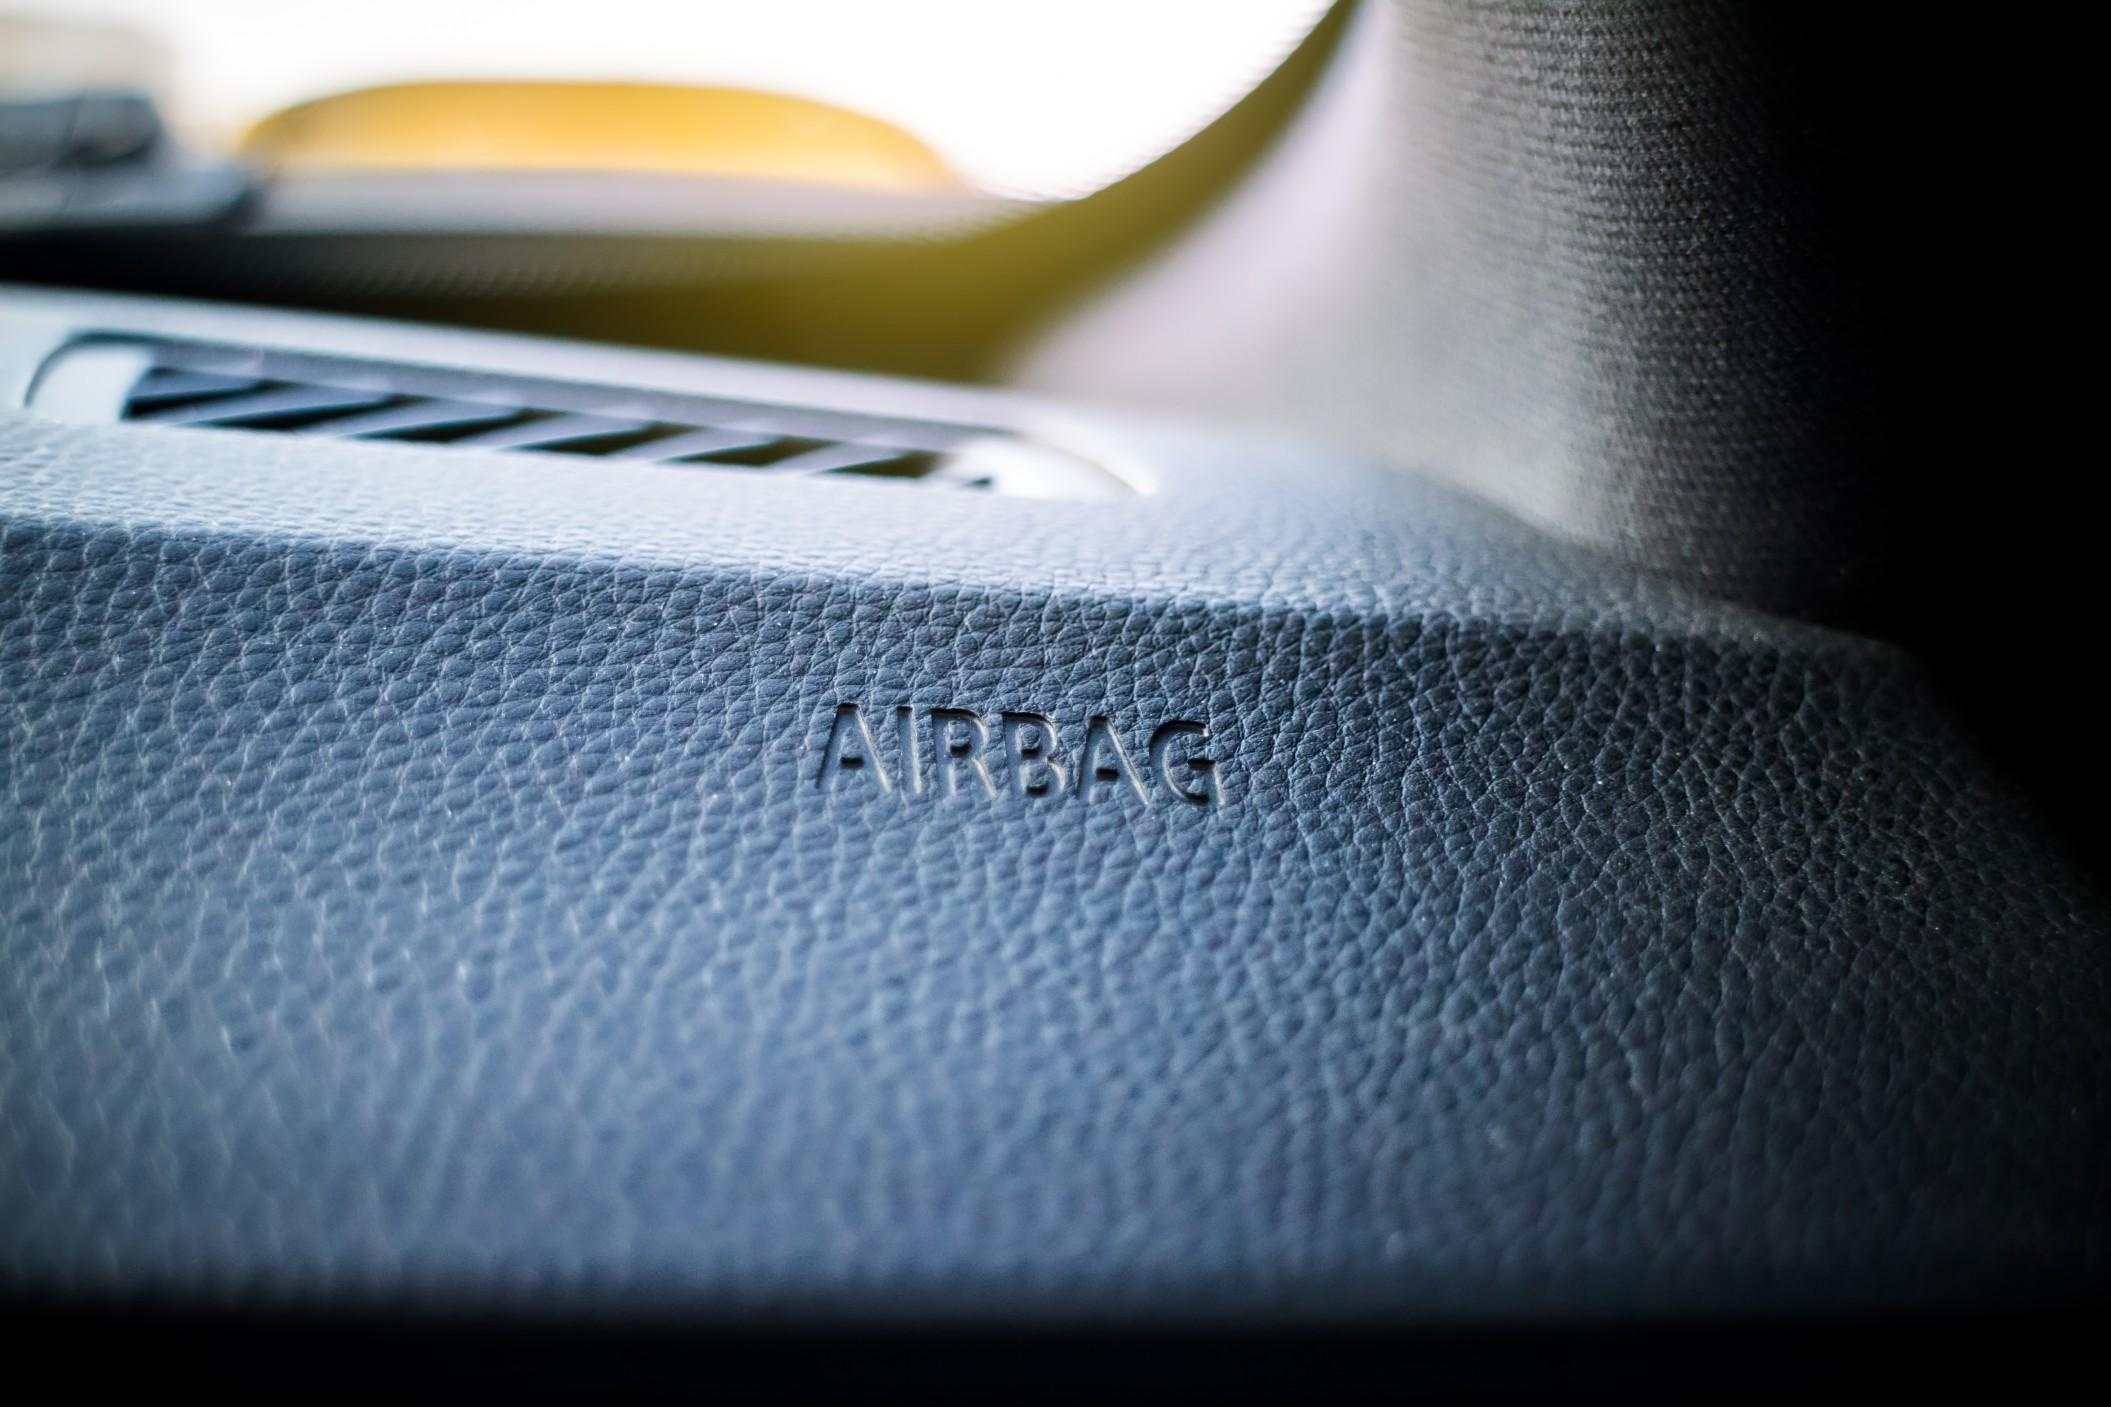 Millions of vehicles were impacted by recalls related to faulty Takata airbags.